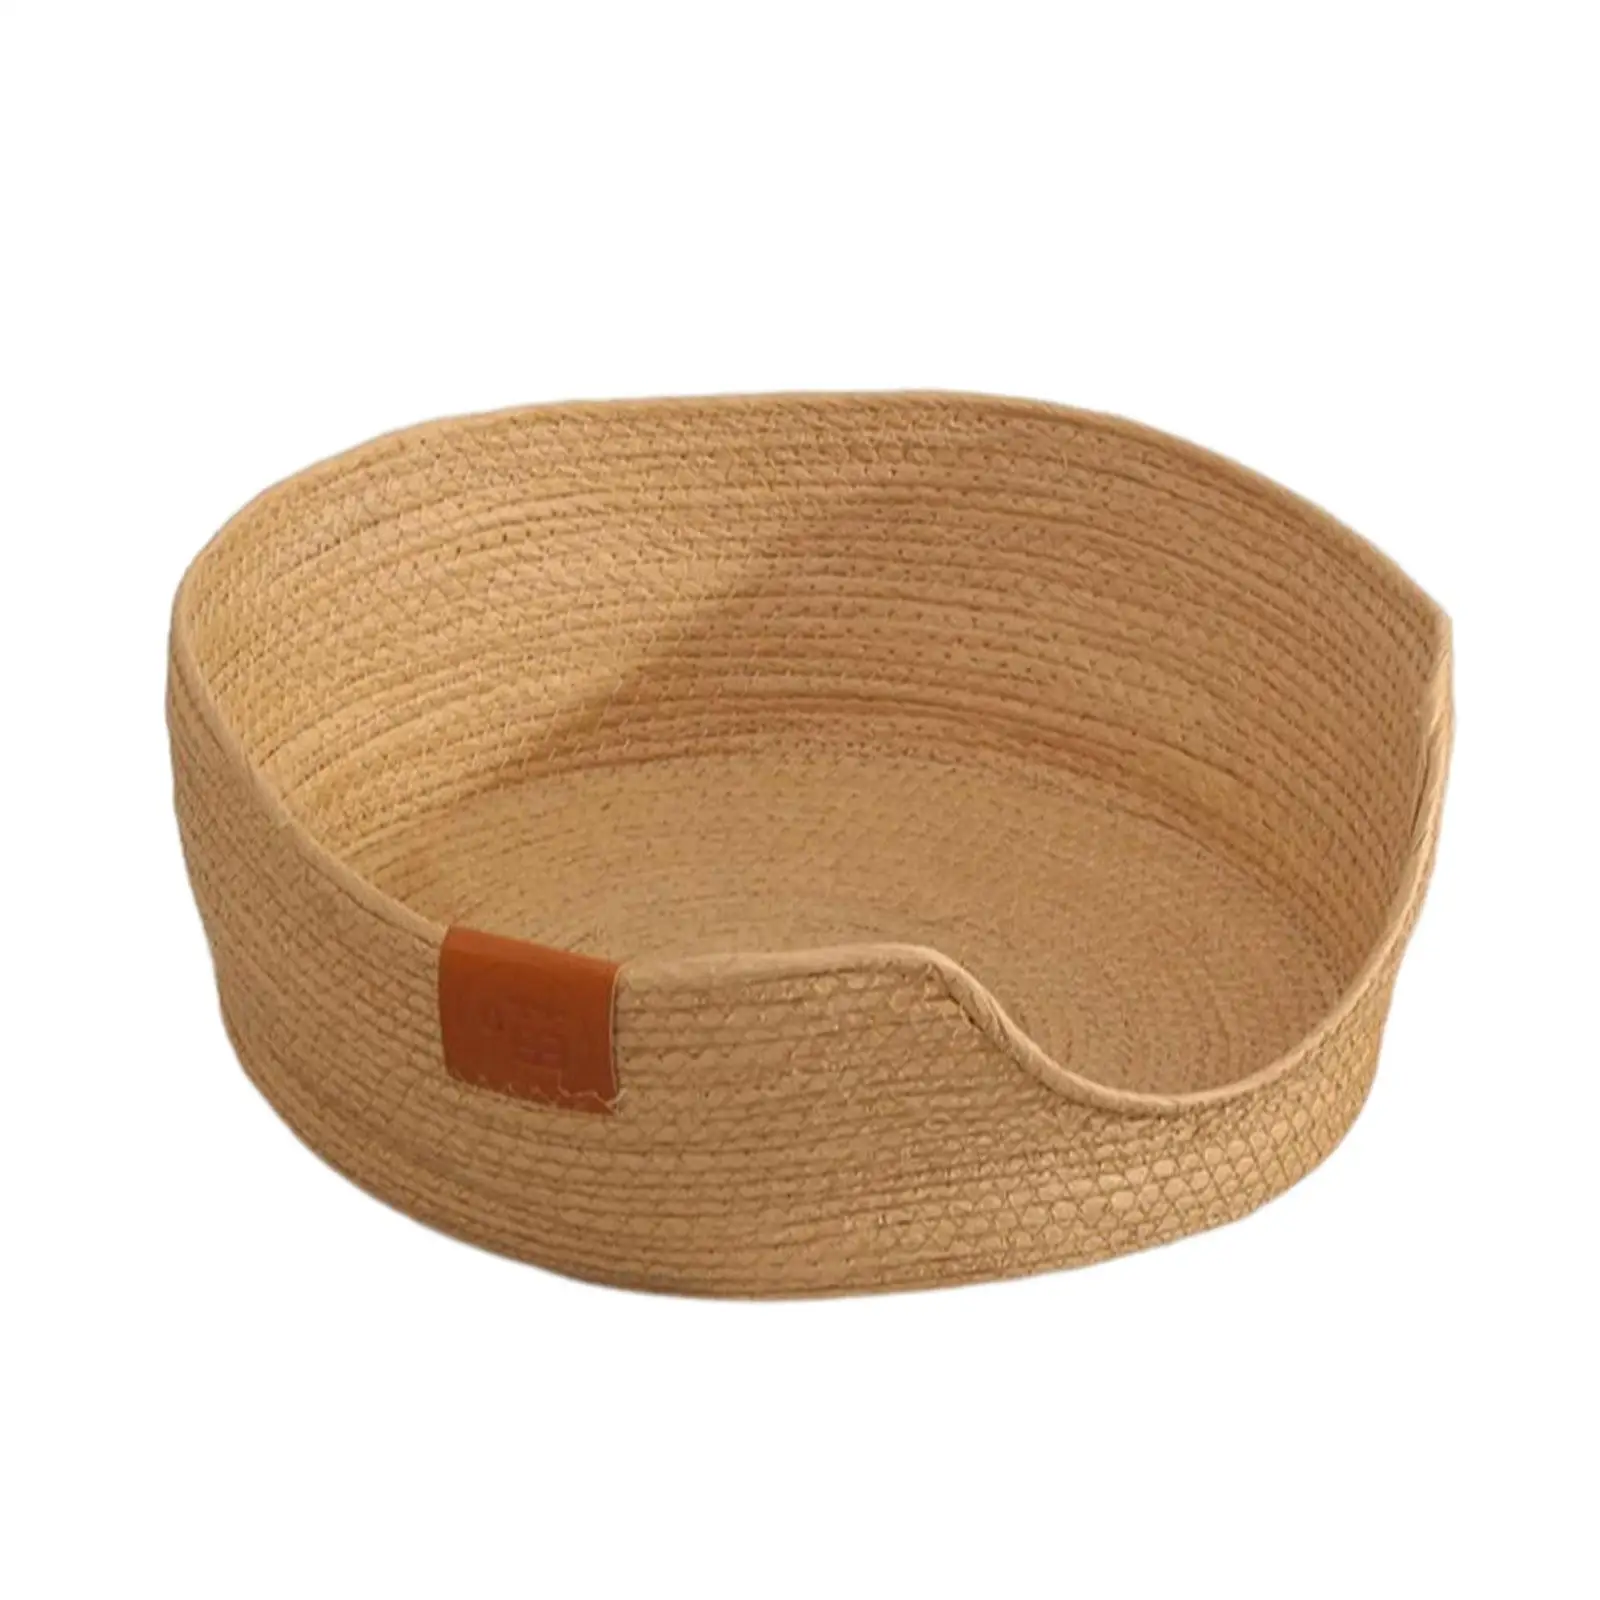 Handwoven Kitten Bed Cat Sleeping Basket Diameter 45cm Comfortable Ventilated Paper Rope Material Handmade for Playing and Rest